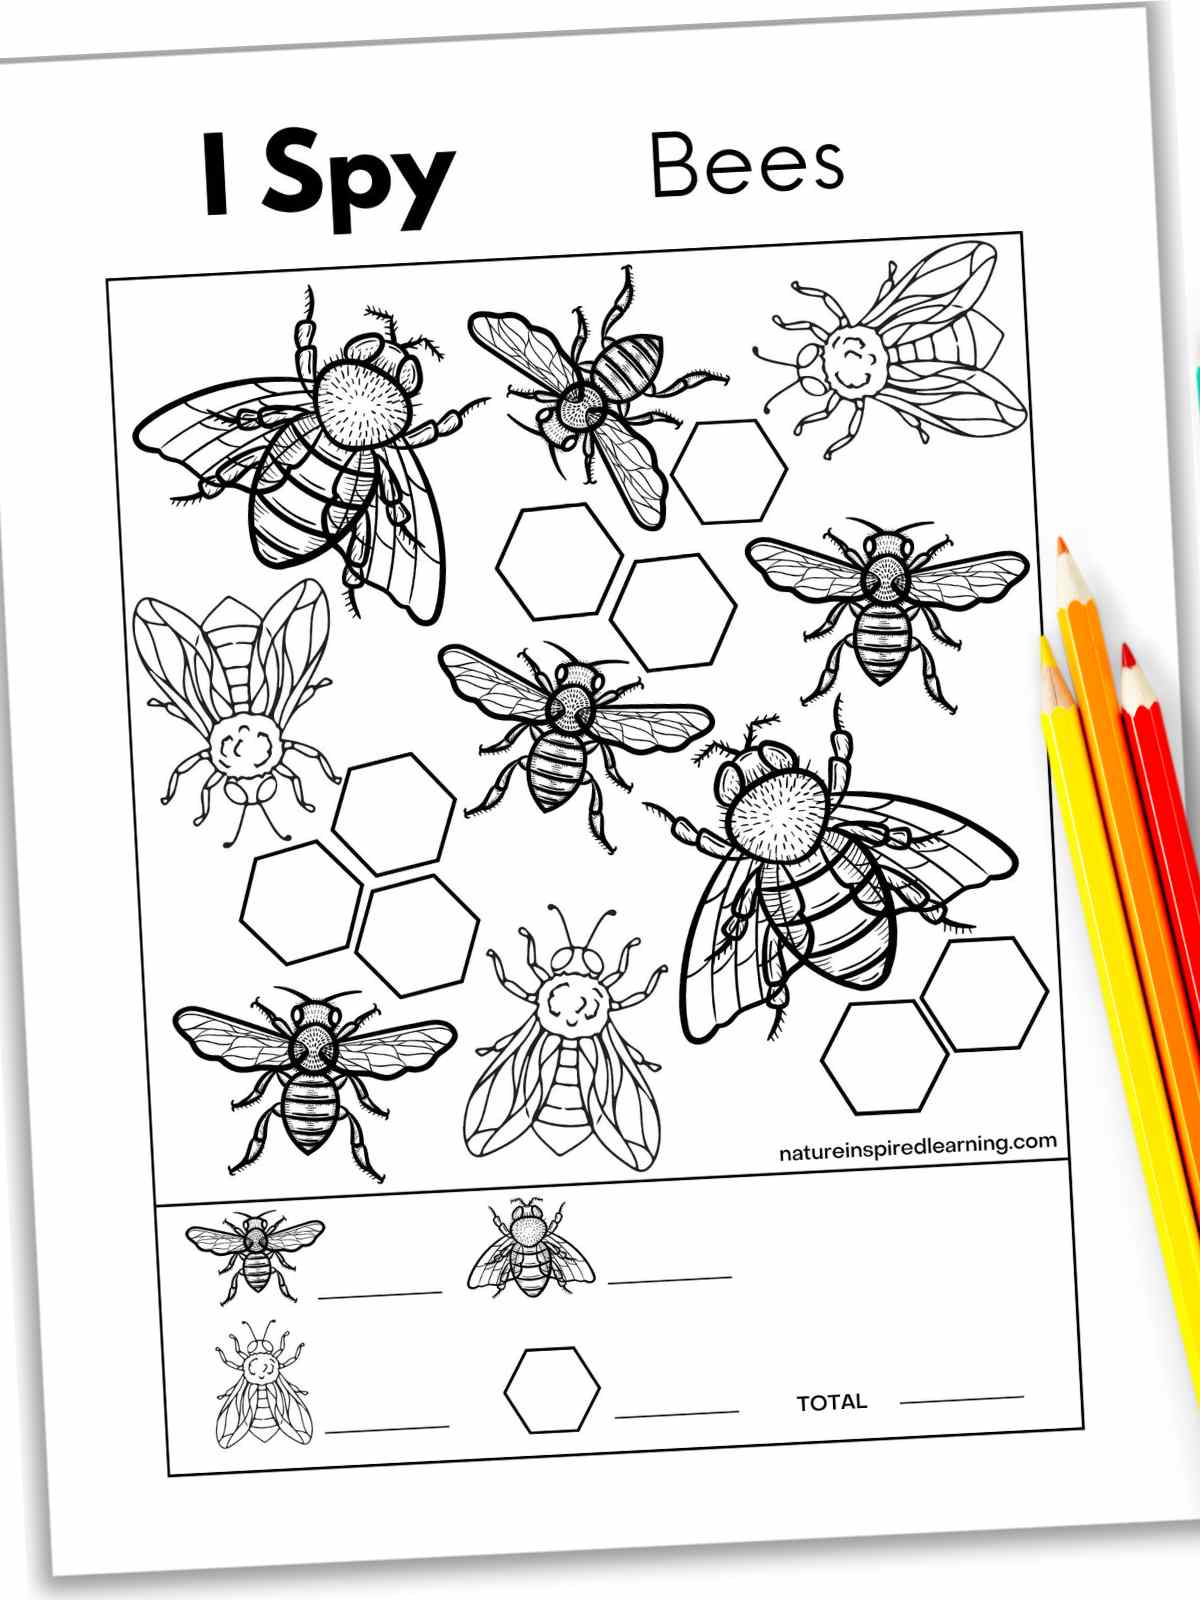 Black and white i spy worksheet with different bees and honeycombs with a yellow, orange, and red colored pencils bottom right.